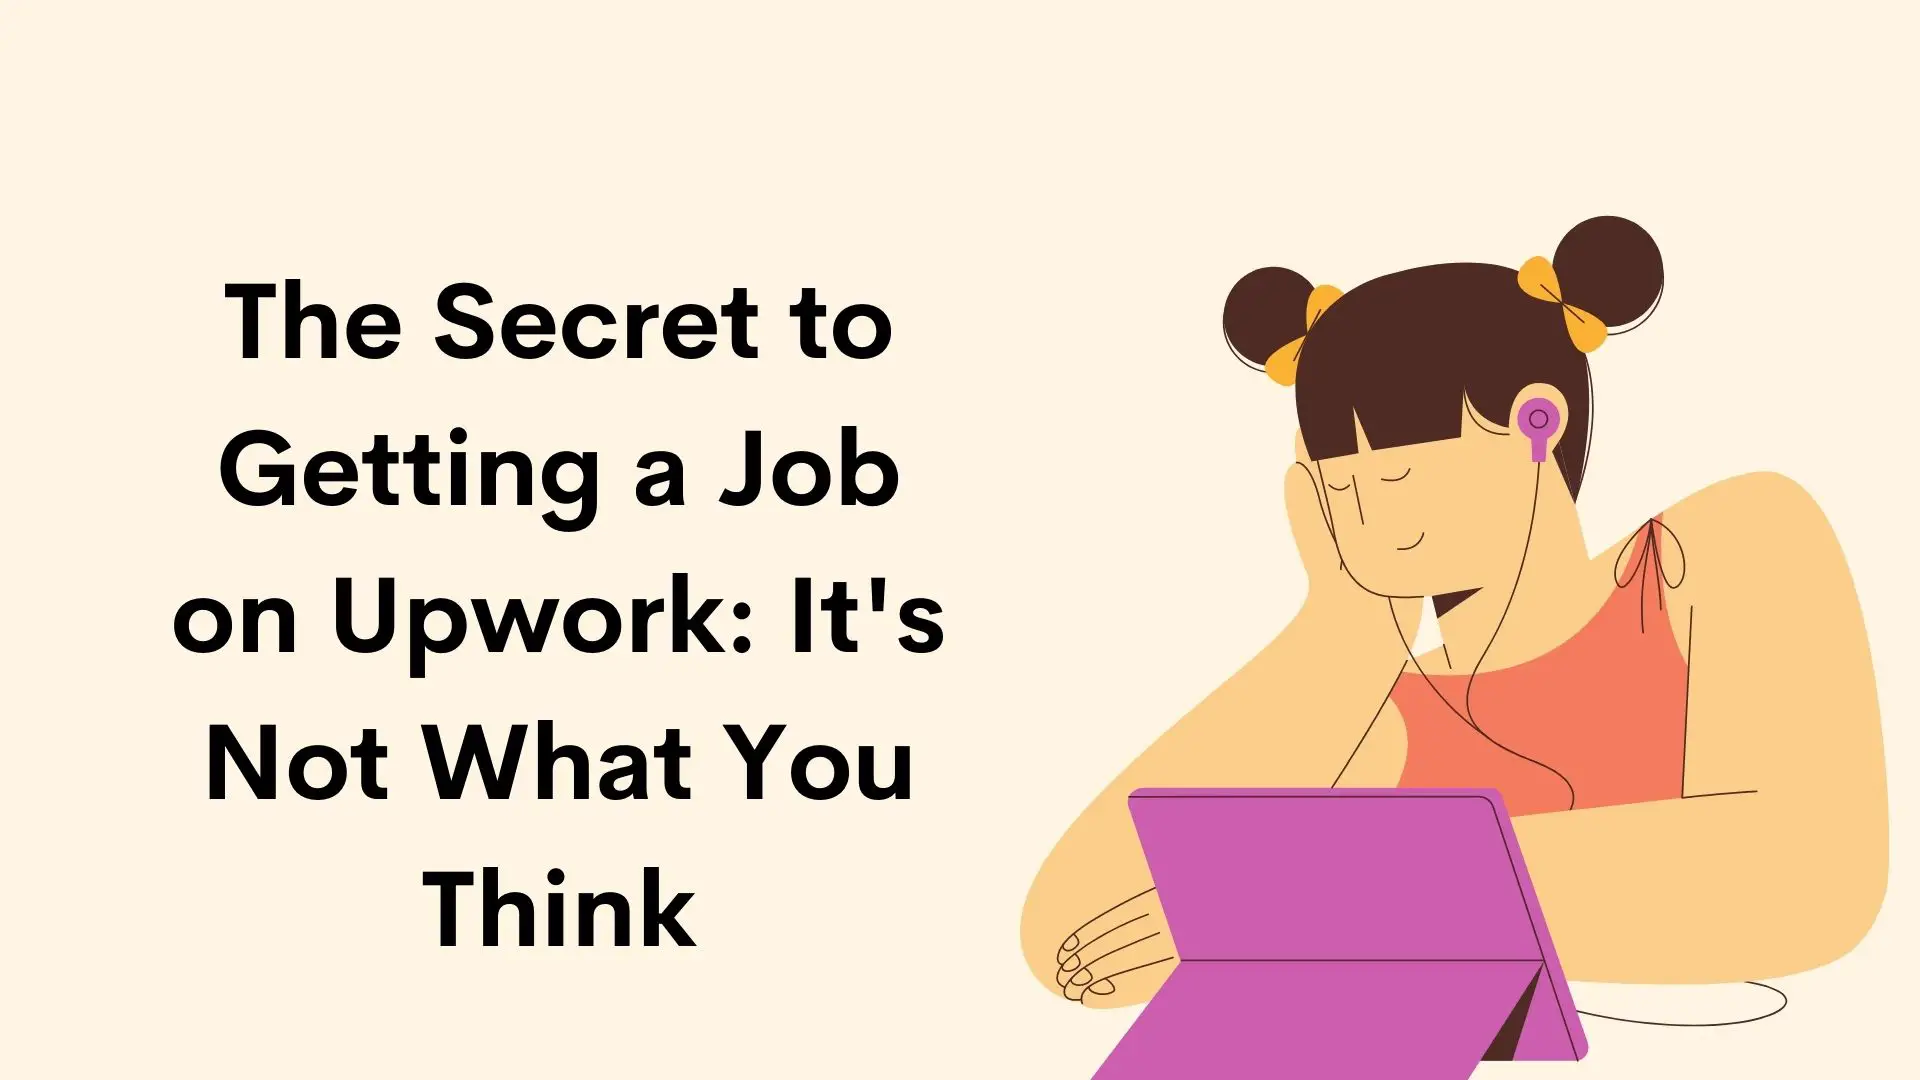 The Secret to Getting a Job on Upwork: It's Not What You Think